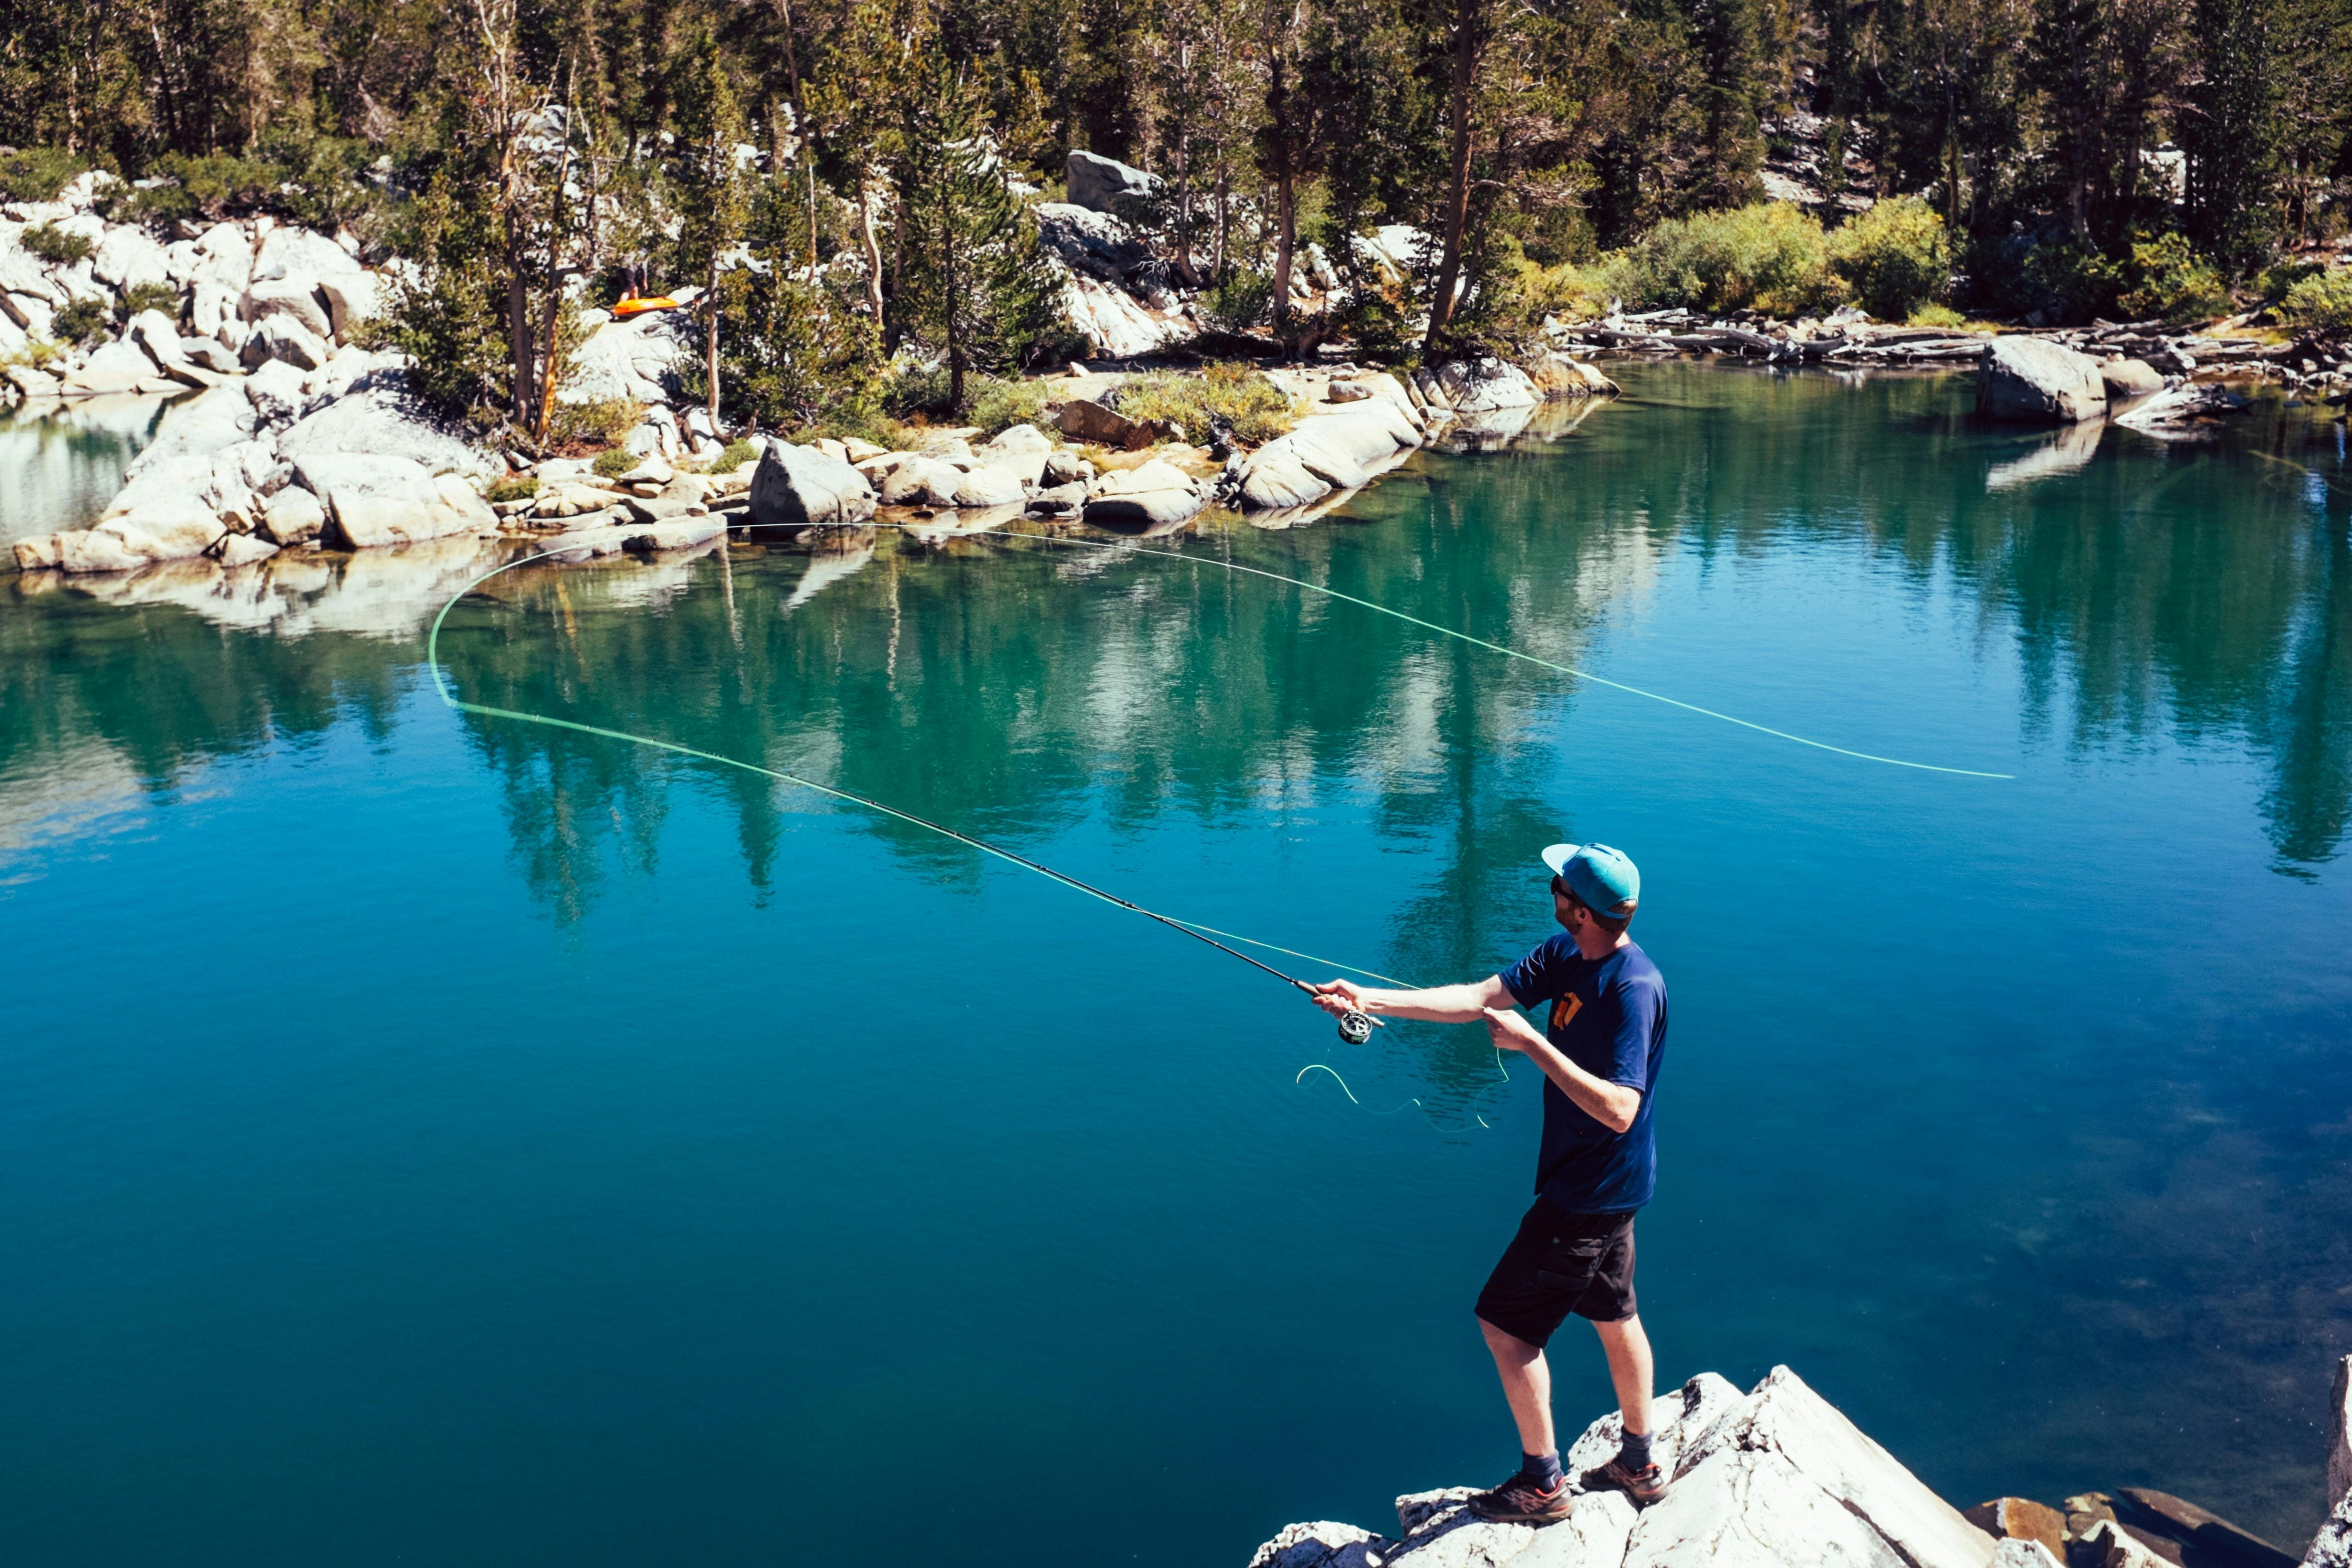 A man in shorts and a t shirt casts a fly fishing rod while standing on some rocks